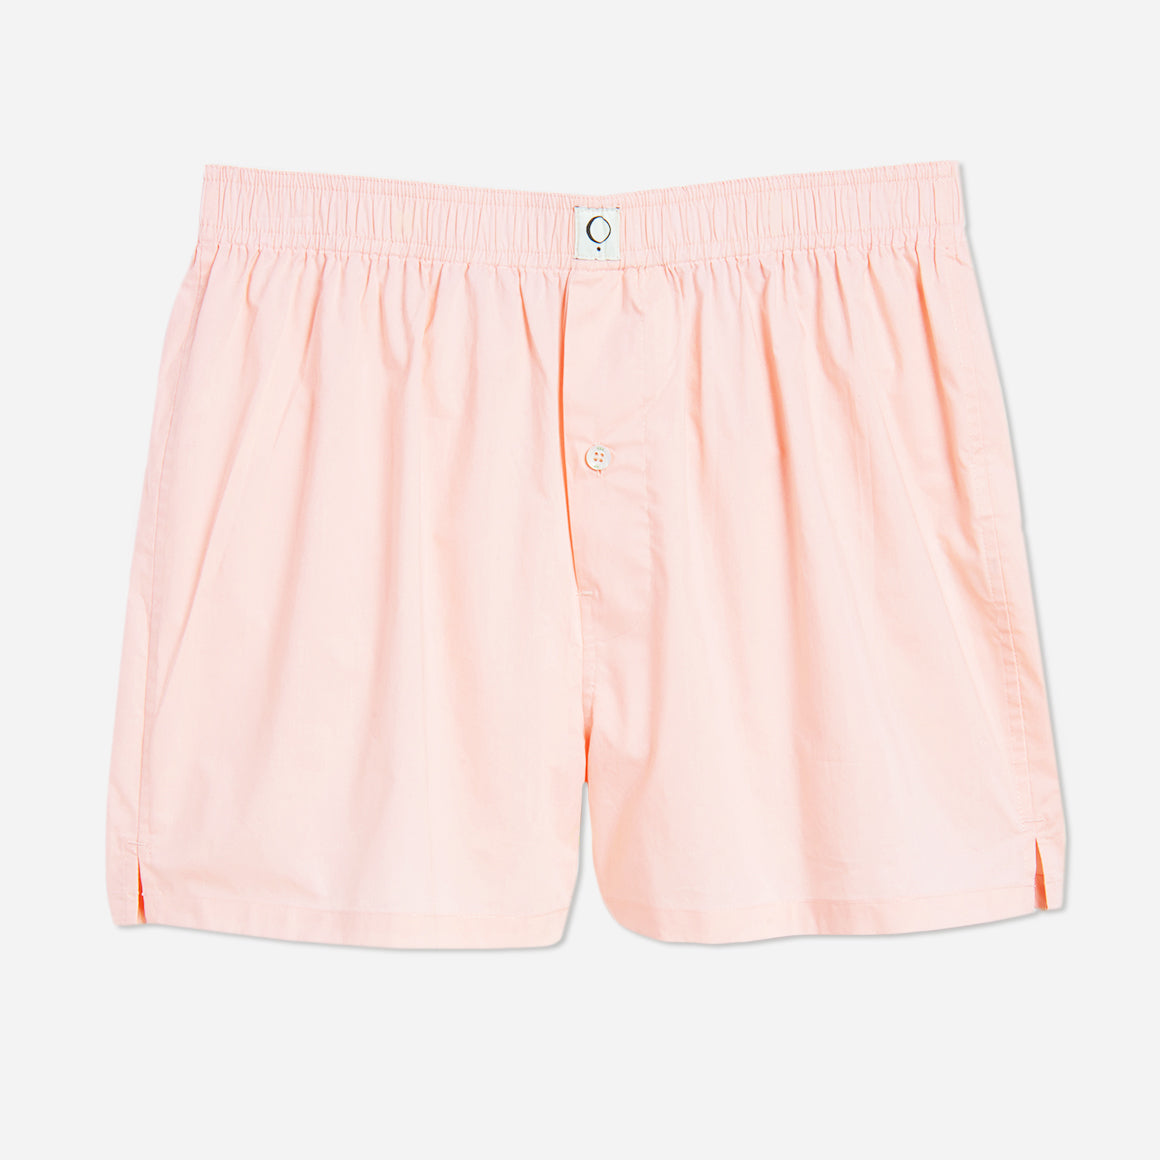 Our organic cotton boxer shorts feature a relaxed fit, button fly, and a soft elastic waistband that when folded over reveals a pop of contrast color. The lightweight fabric offers breathability and comfort for a peaceful night's sleep and a stylish look that is perfect for lounging at home.